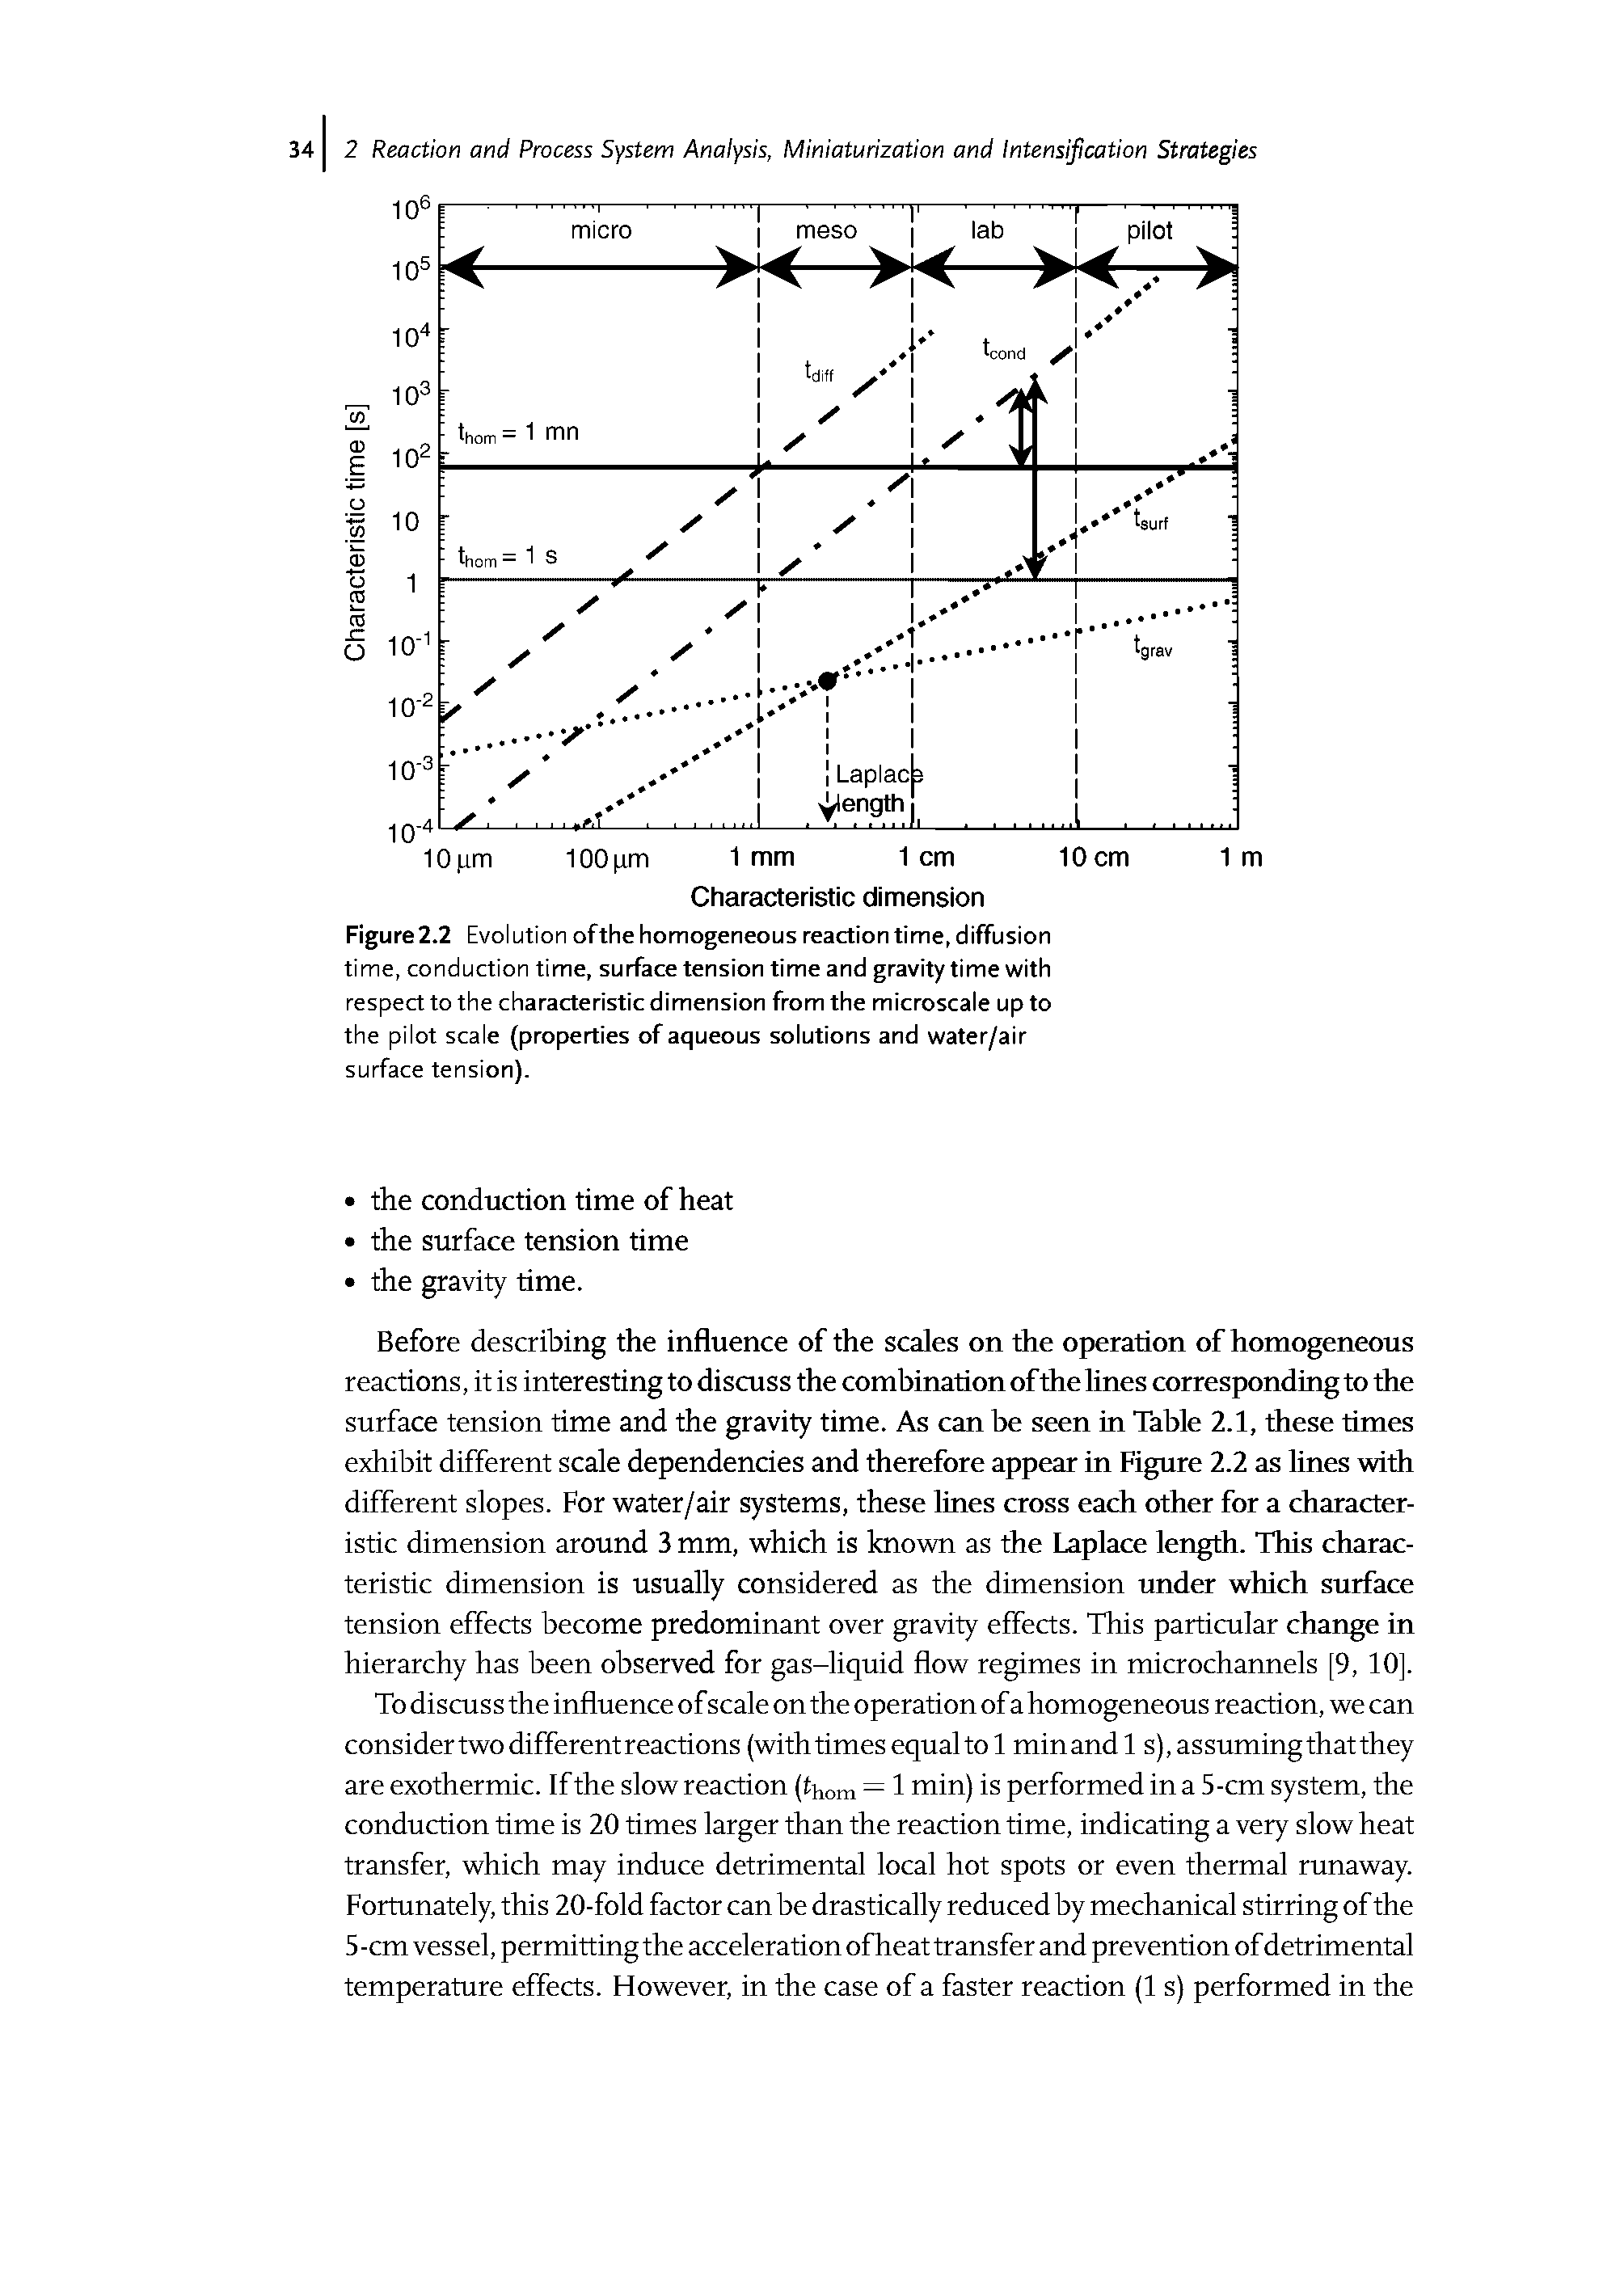 Figure2.2 Evolution ofthe homogeneous reaction time, diffusion time, conduction time, surface tension time and gravity time with respect to the characteristic dimension from the microscale up to the pilot scale (properties of aqueous solutions and water/air surface tension).